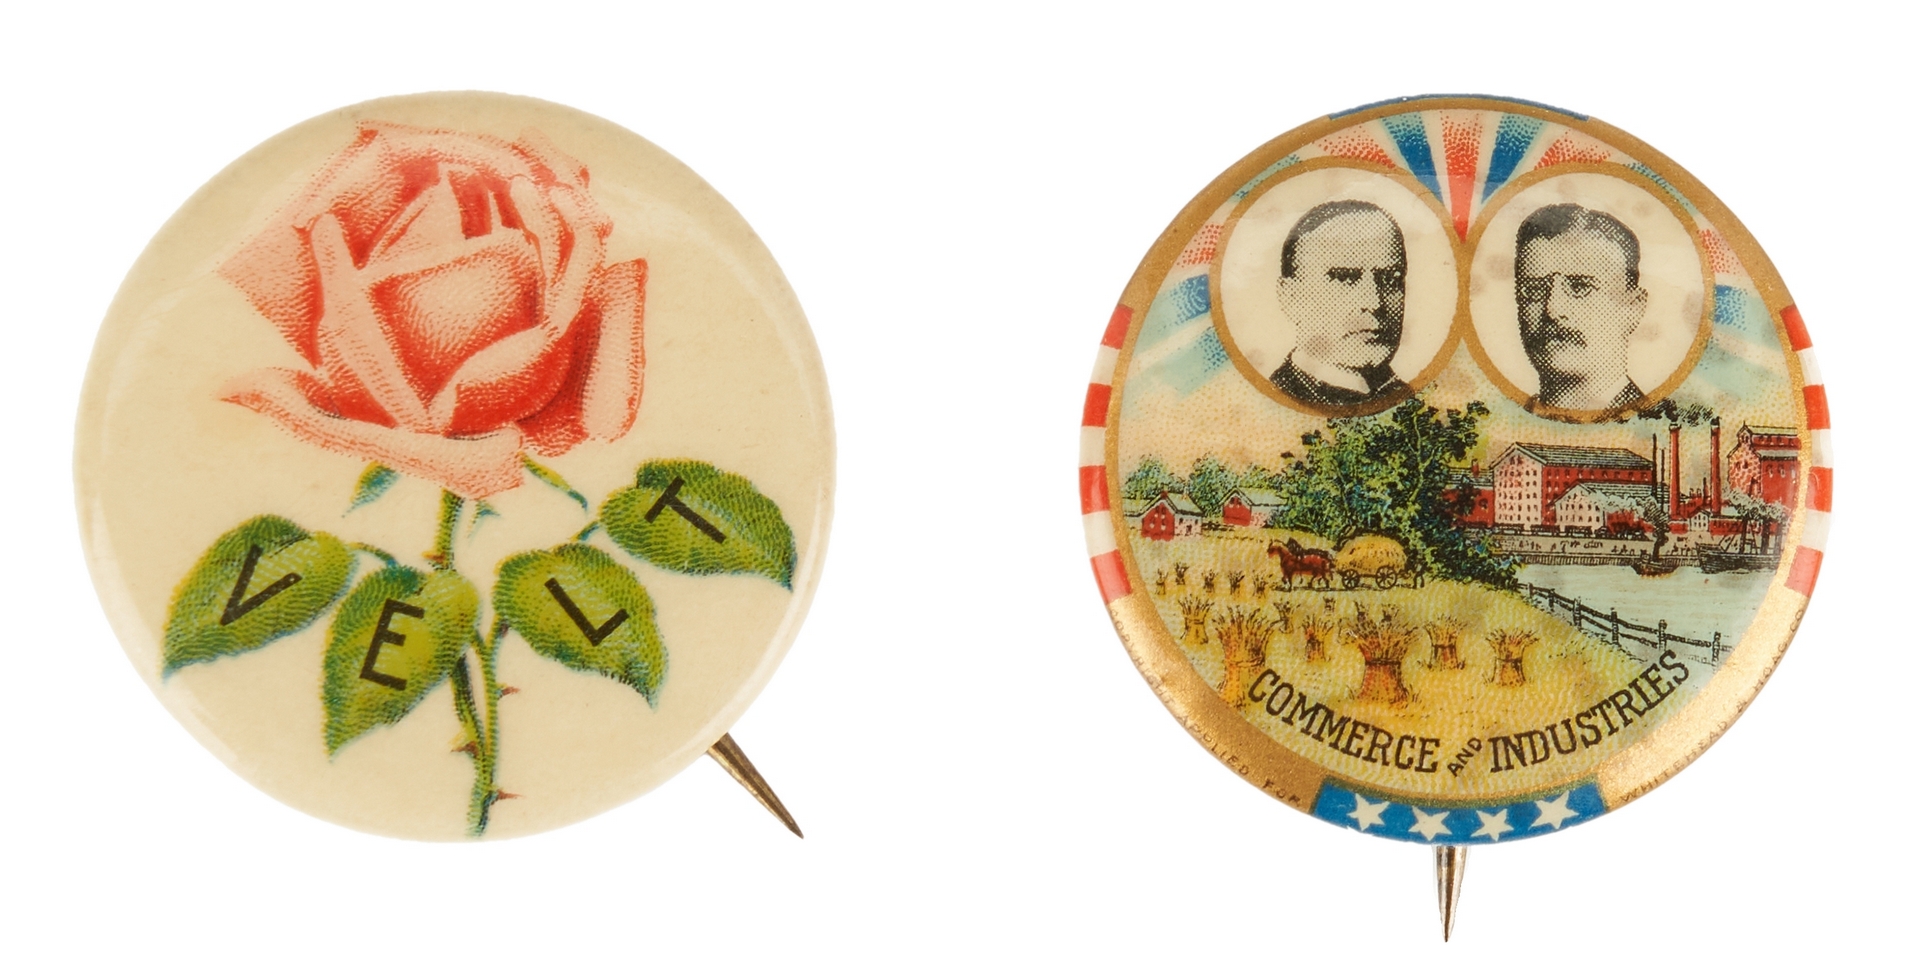 Lot 1008: 2 McKinley and Roosevelt Buttons, incl. Commerce and Industries